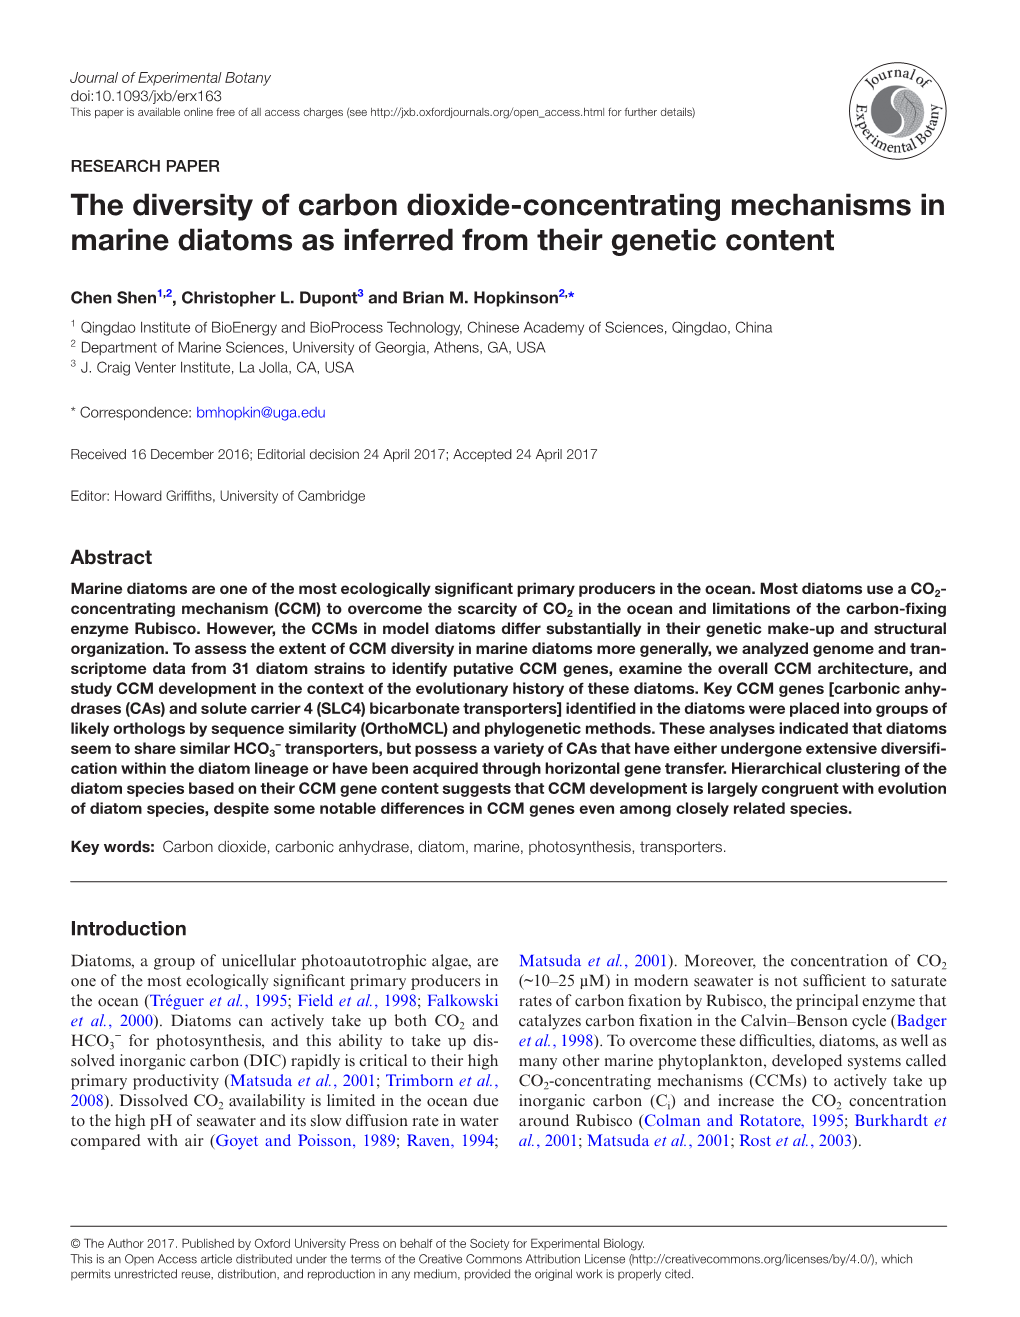 The Diversity of Carbon Dioxide-Concentrating Mechanisms in Marine Diatoms As Inferred from Their Genetic Content